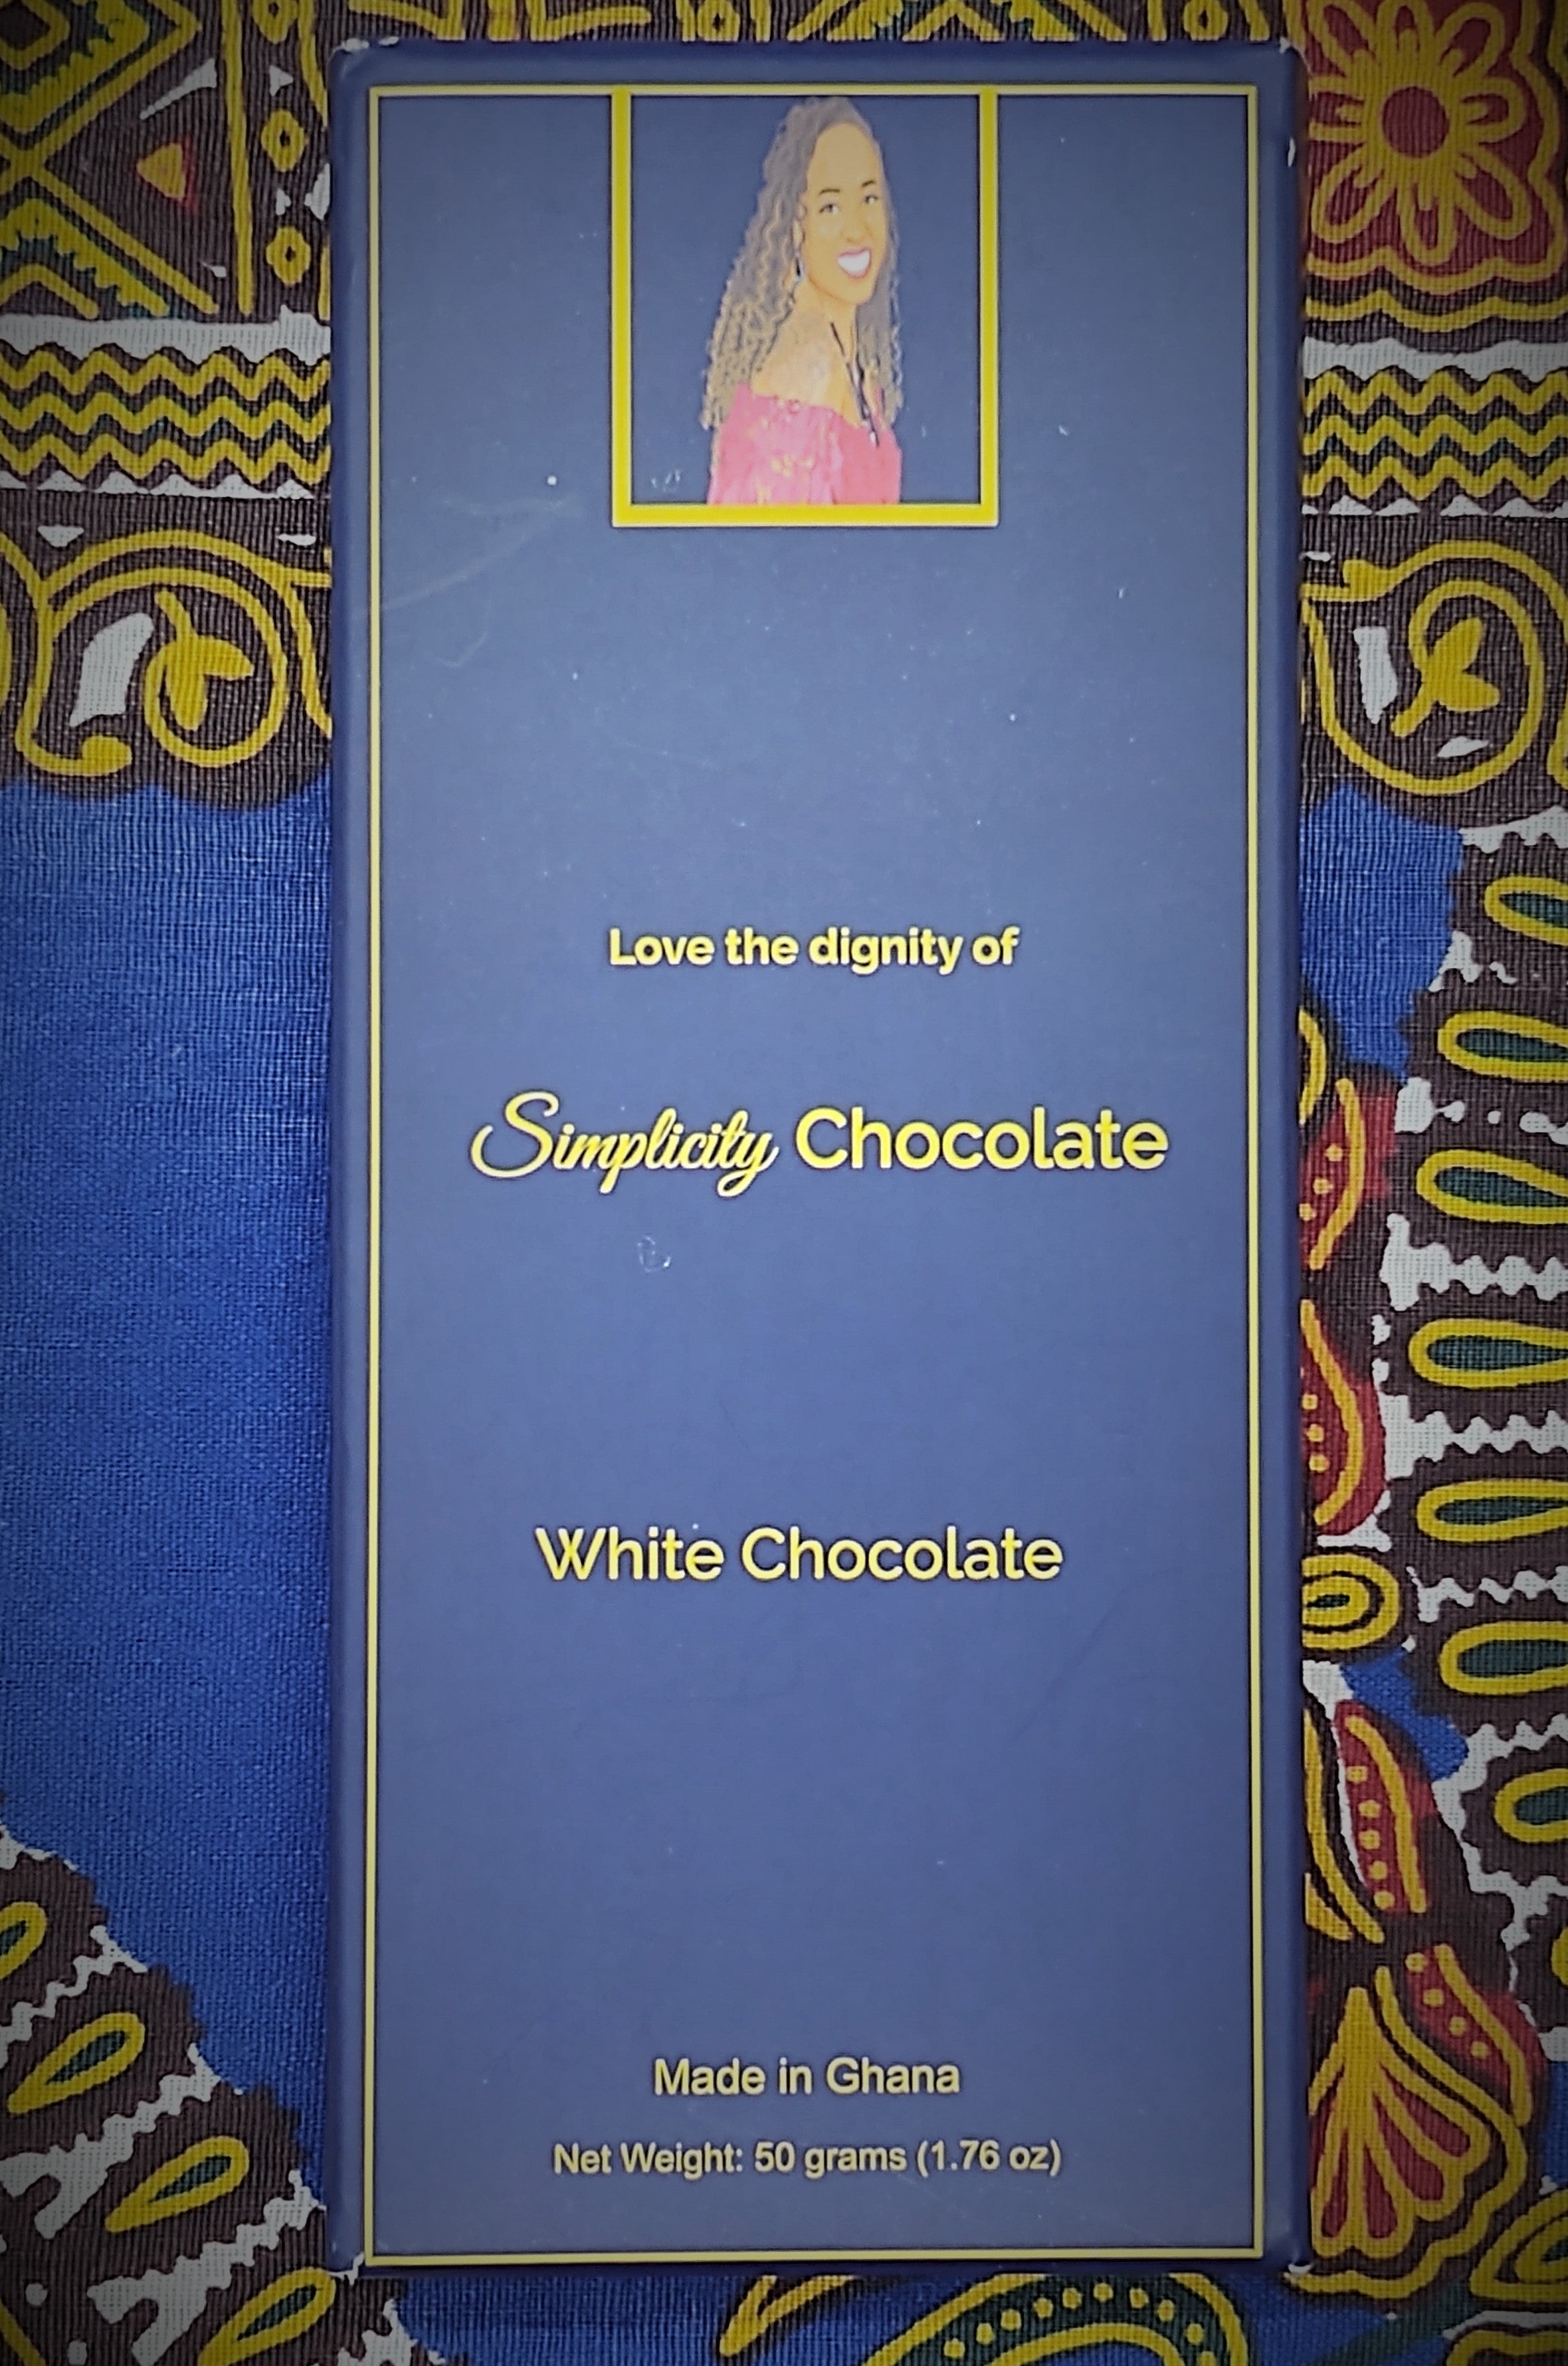 Pictured: The Simplicity Chocolate bar wrapped in complete packaging which consists of a dark blue box with gold writing. A portrait of the CEO is centered at the top of the packaging. The CEO is seated, looking over her right shoulder, wearing a magenta, off the shoulder top and a royal blue gemstone necklace with matching earrings. The packaging reads, "Love the dignity of Simplicity Chocolate" in the center of the package. White Chocolate. Made in Ghana. Net Weight: 50 grams (1.76 oz).